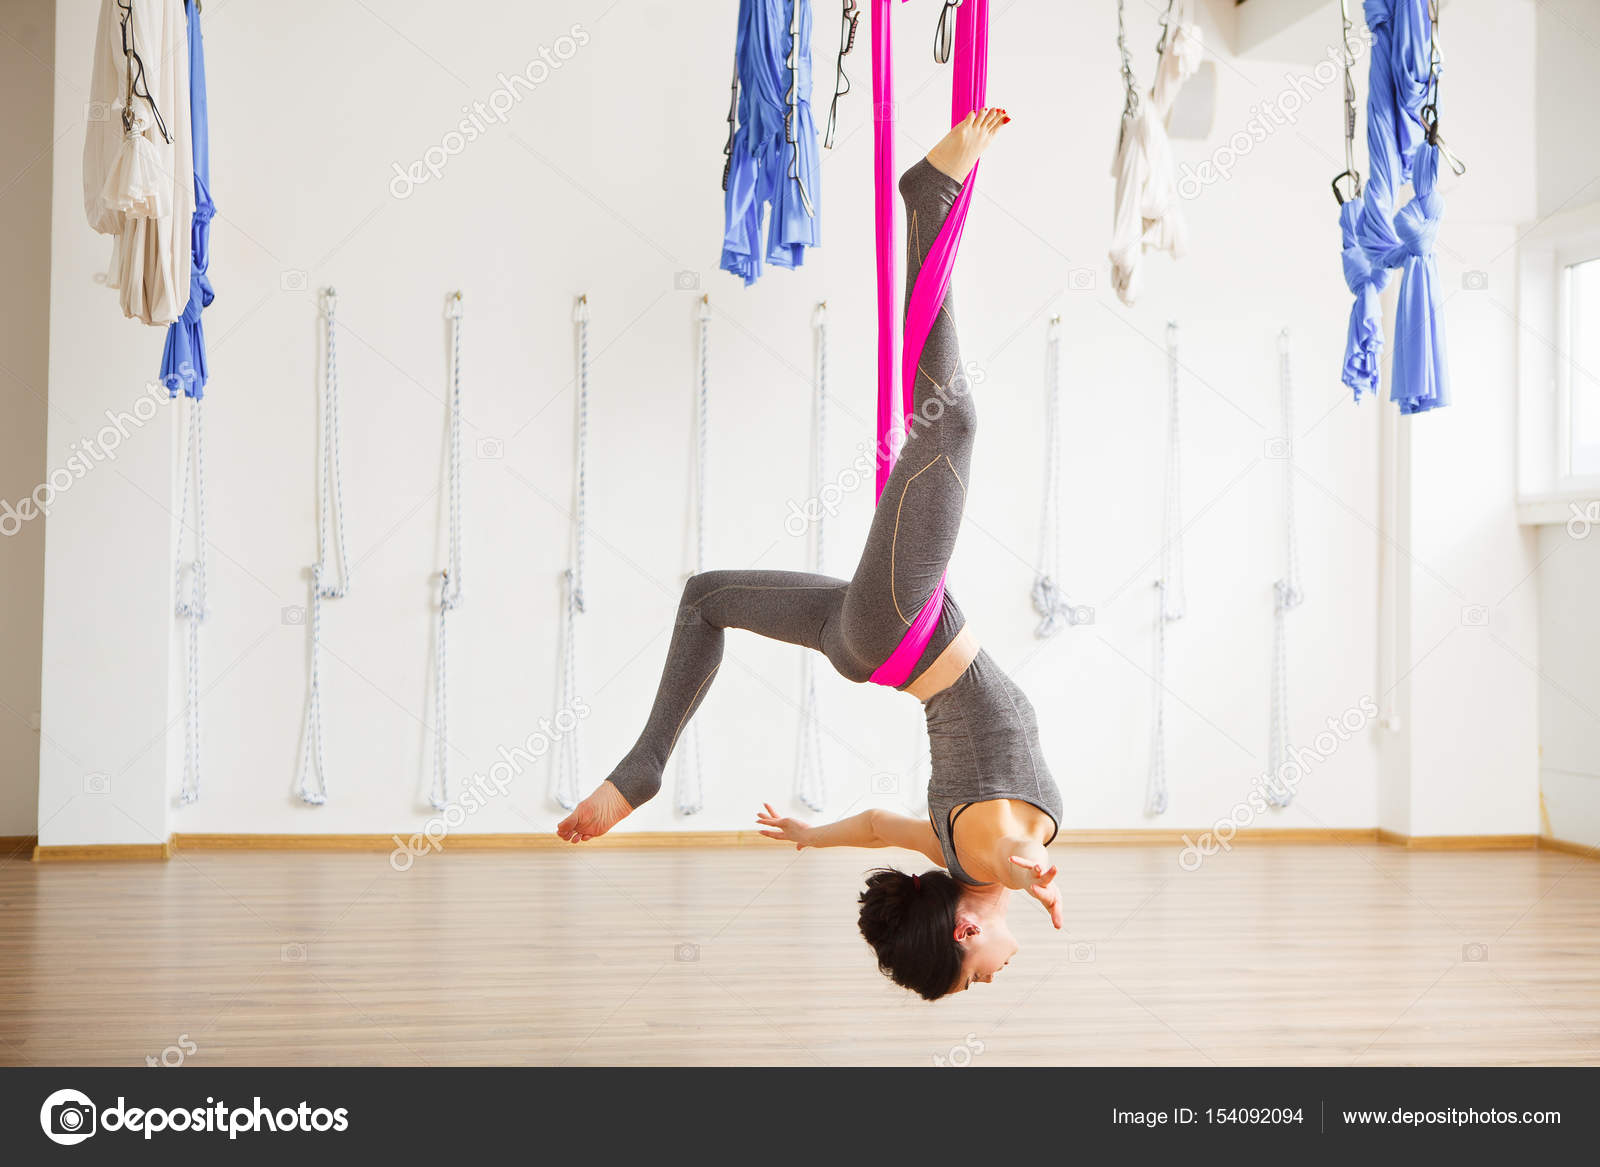 Dropship Flexible Gym Hanging Inversion Swing Aerial Yoga Hammock Stretcher  Band Belt to Sell Online at a Lower Price | Doba